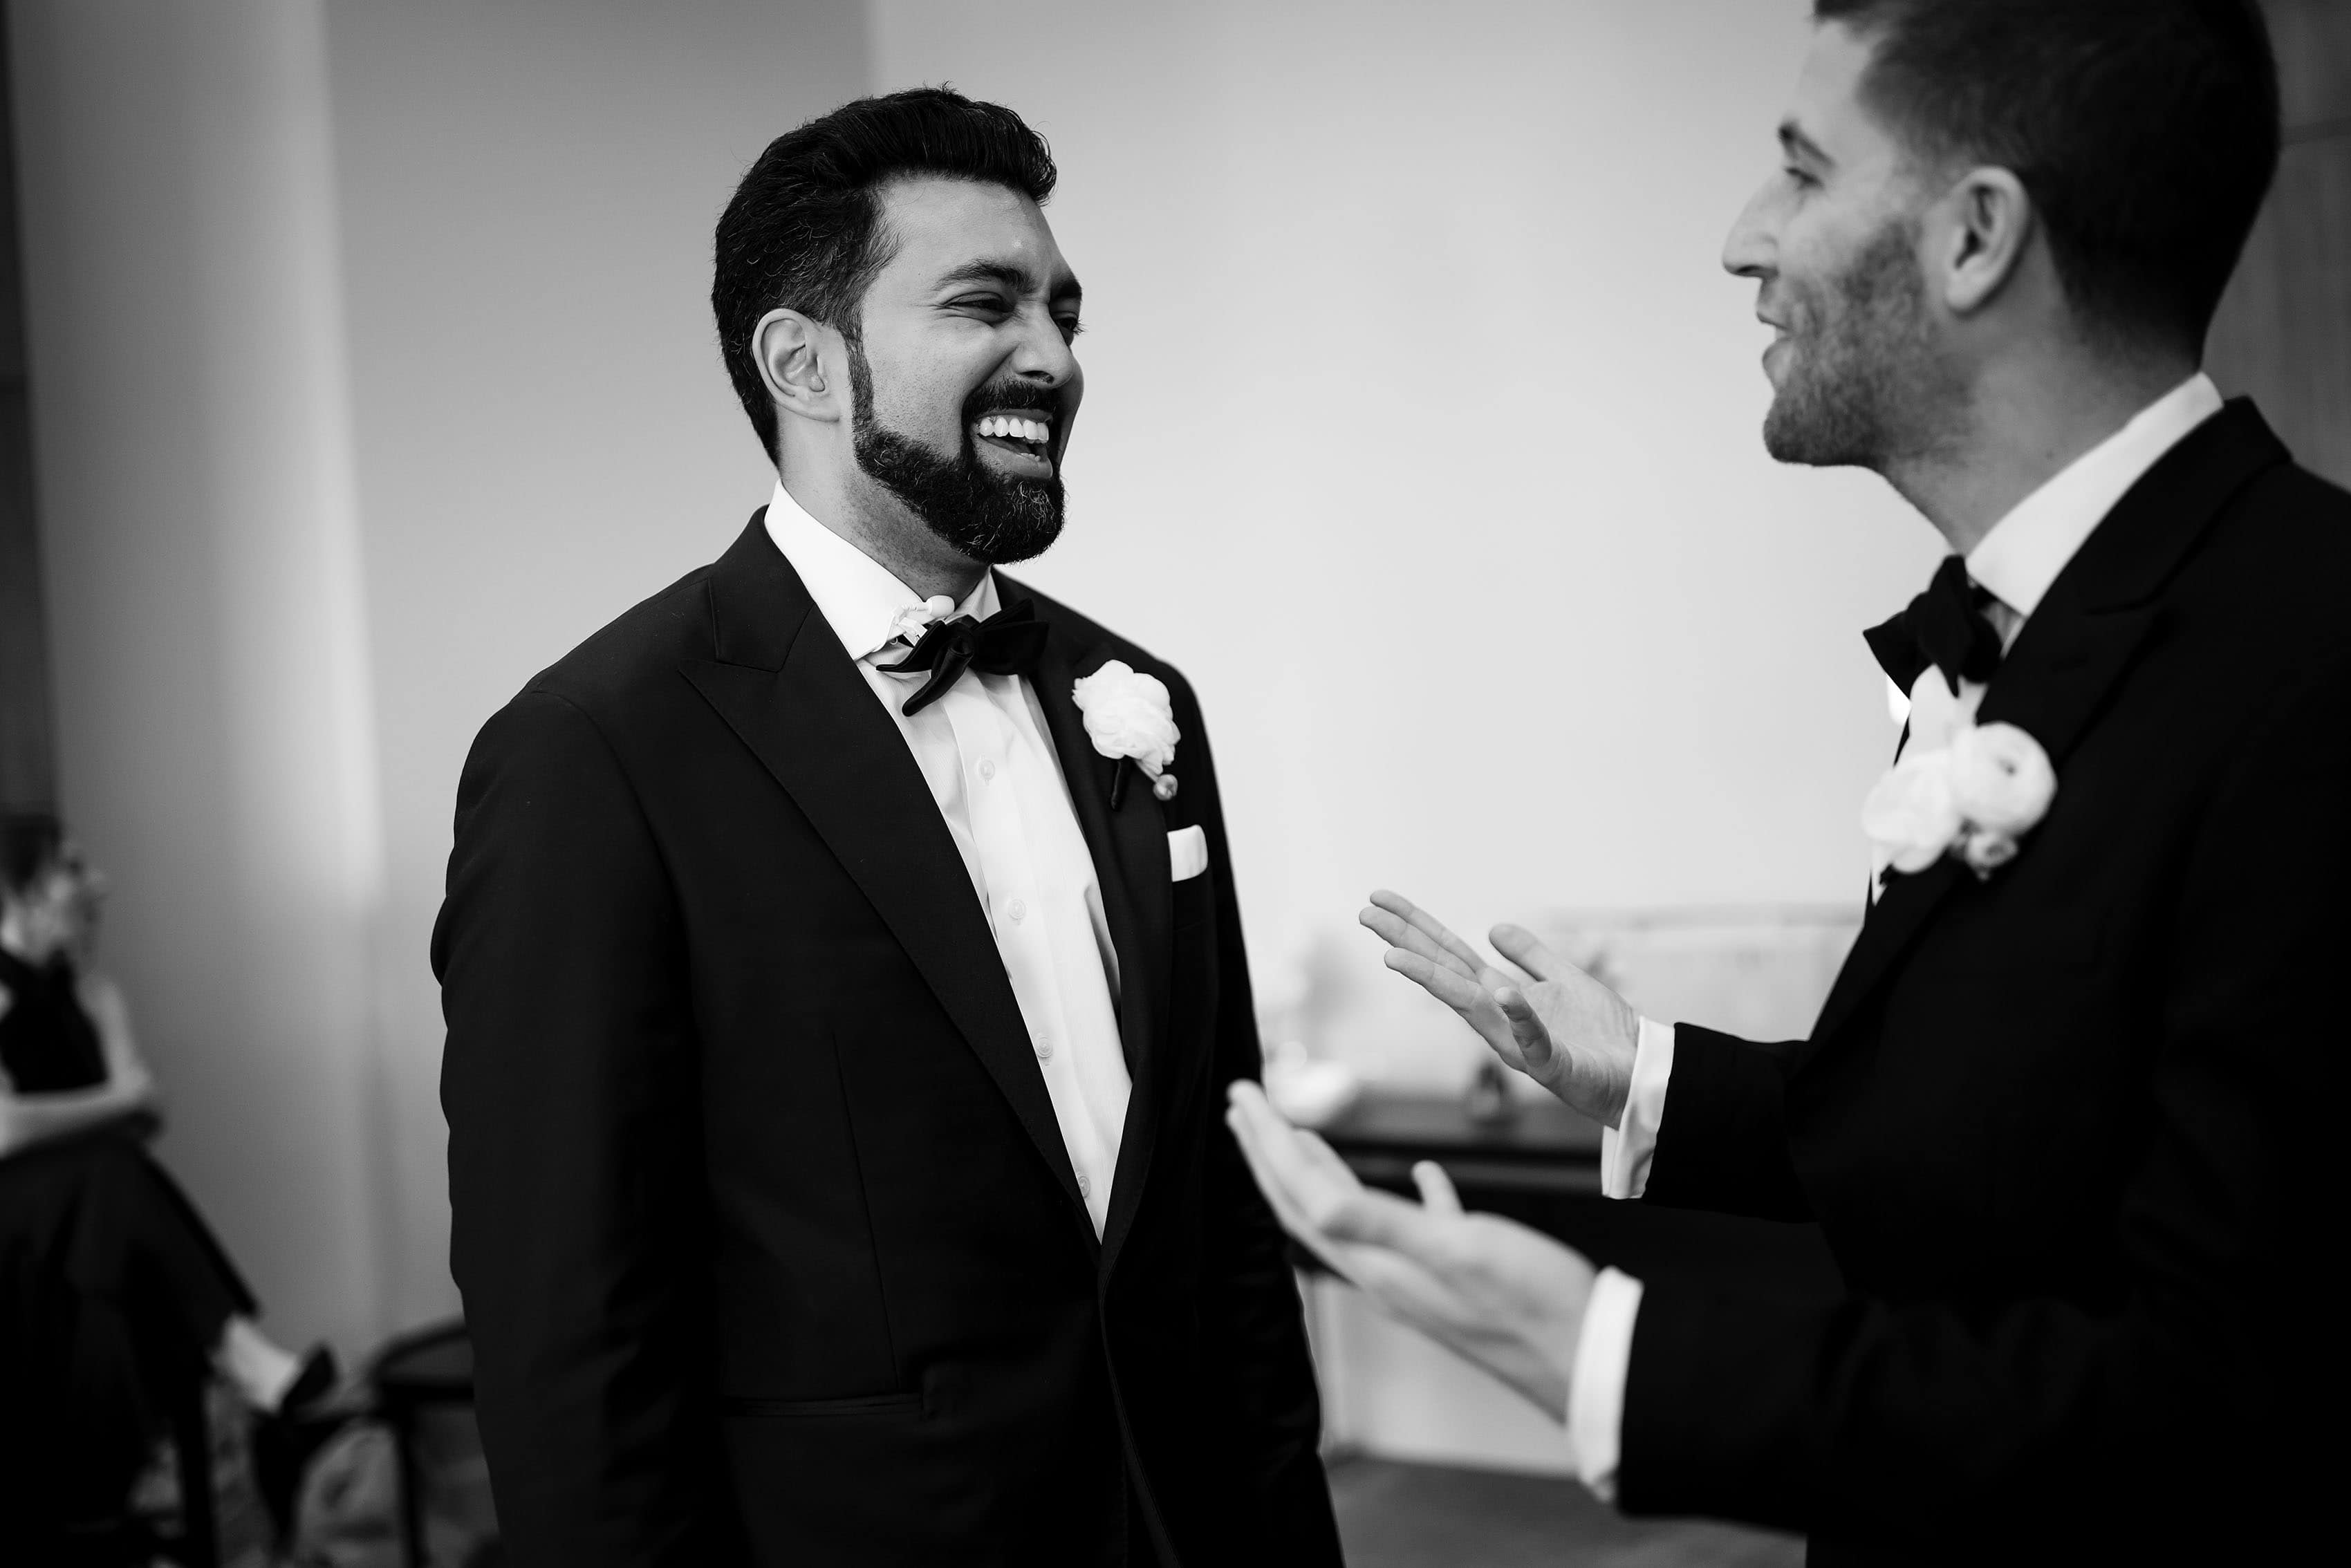 The groom shares a laugh with a family member